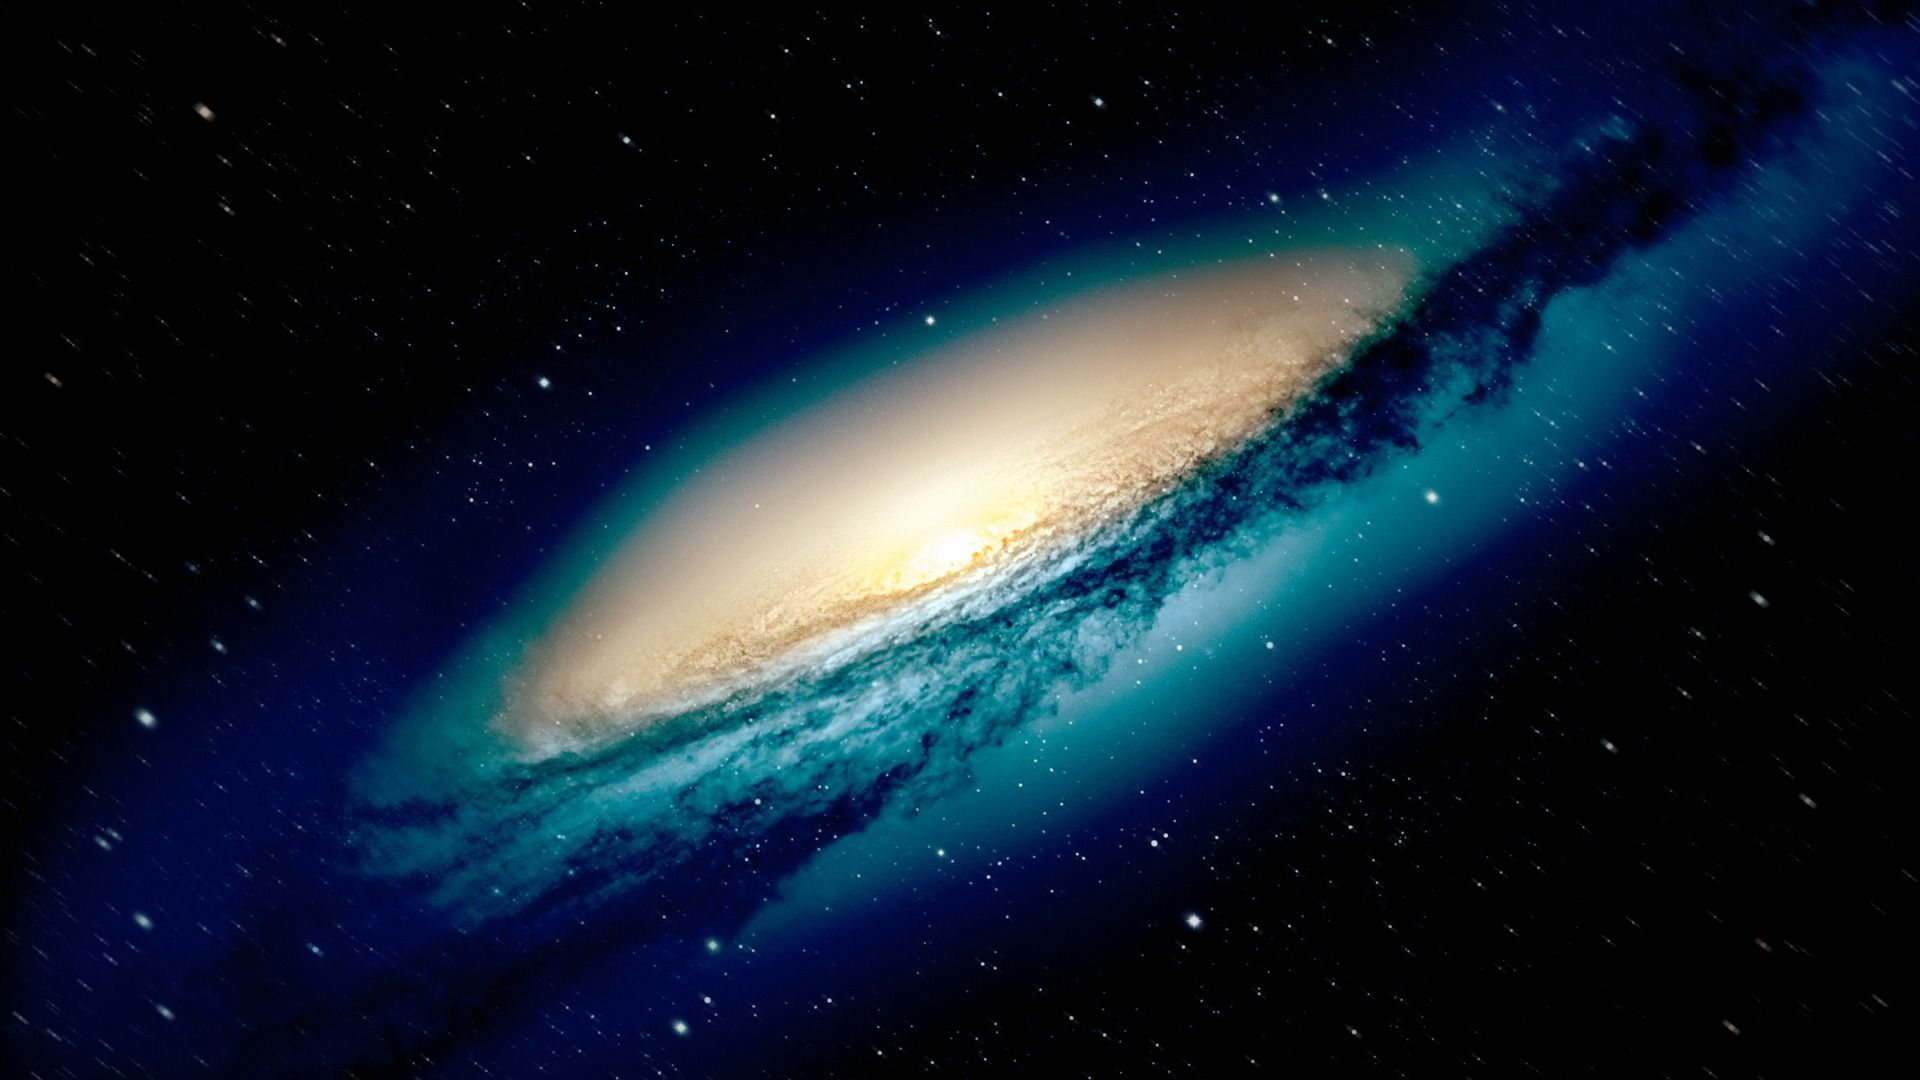 Space Hd Wallpapers 1920x1080 (page 4) - Pics about space